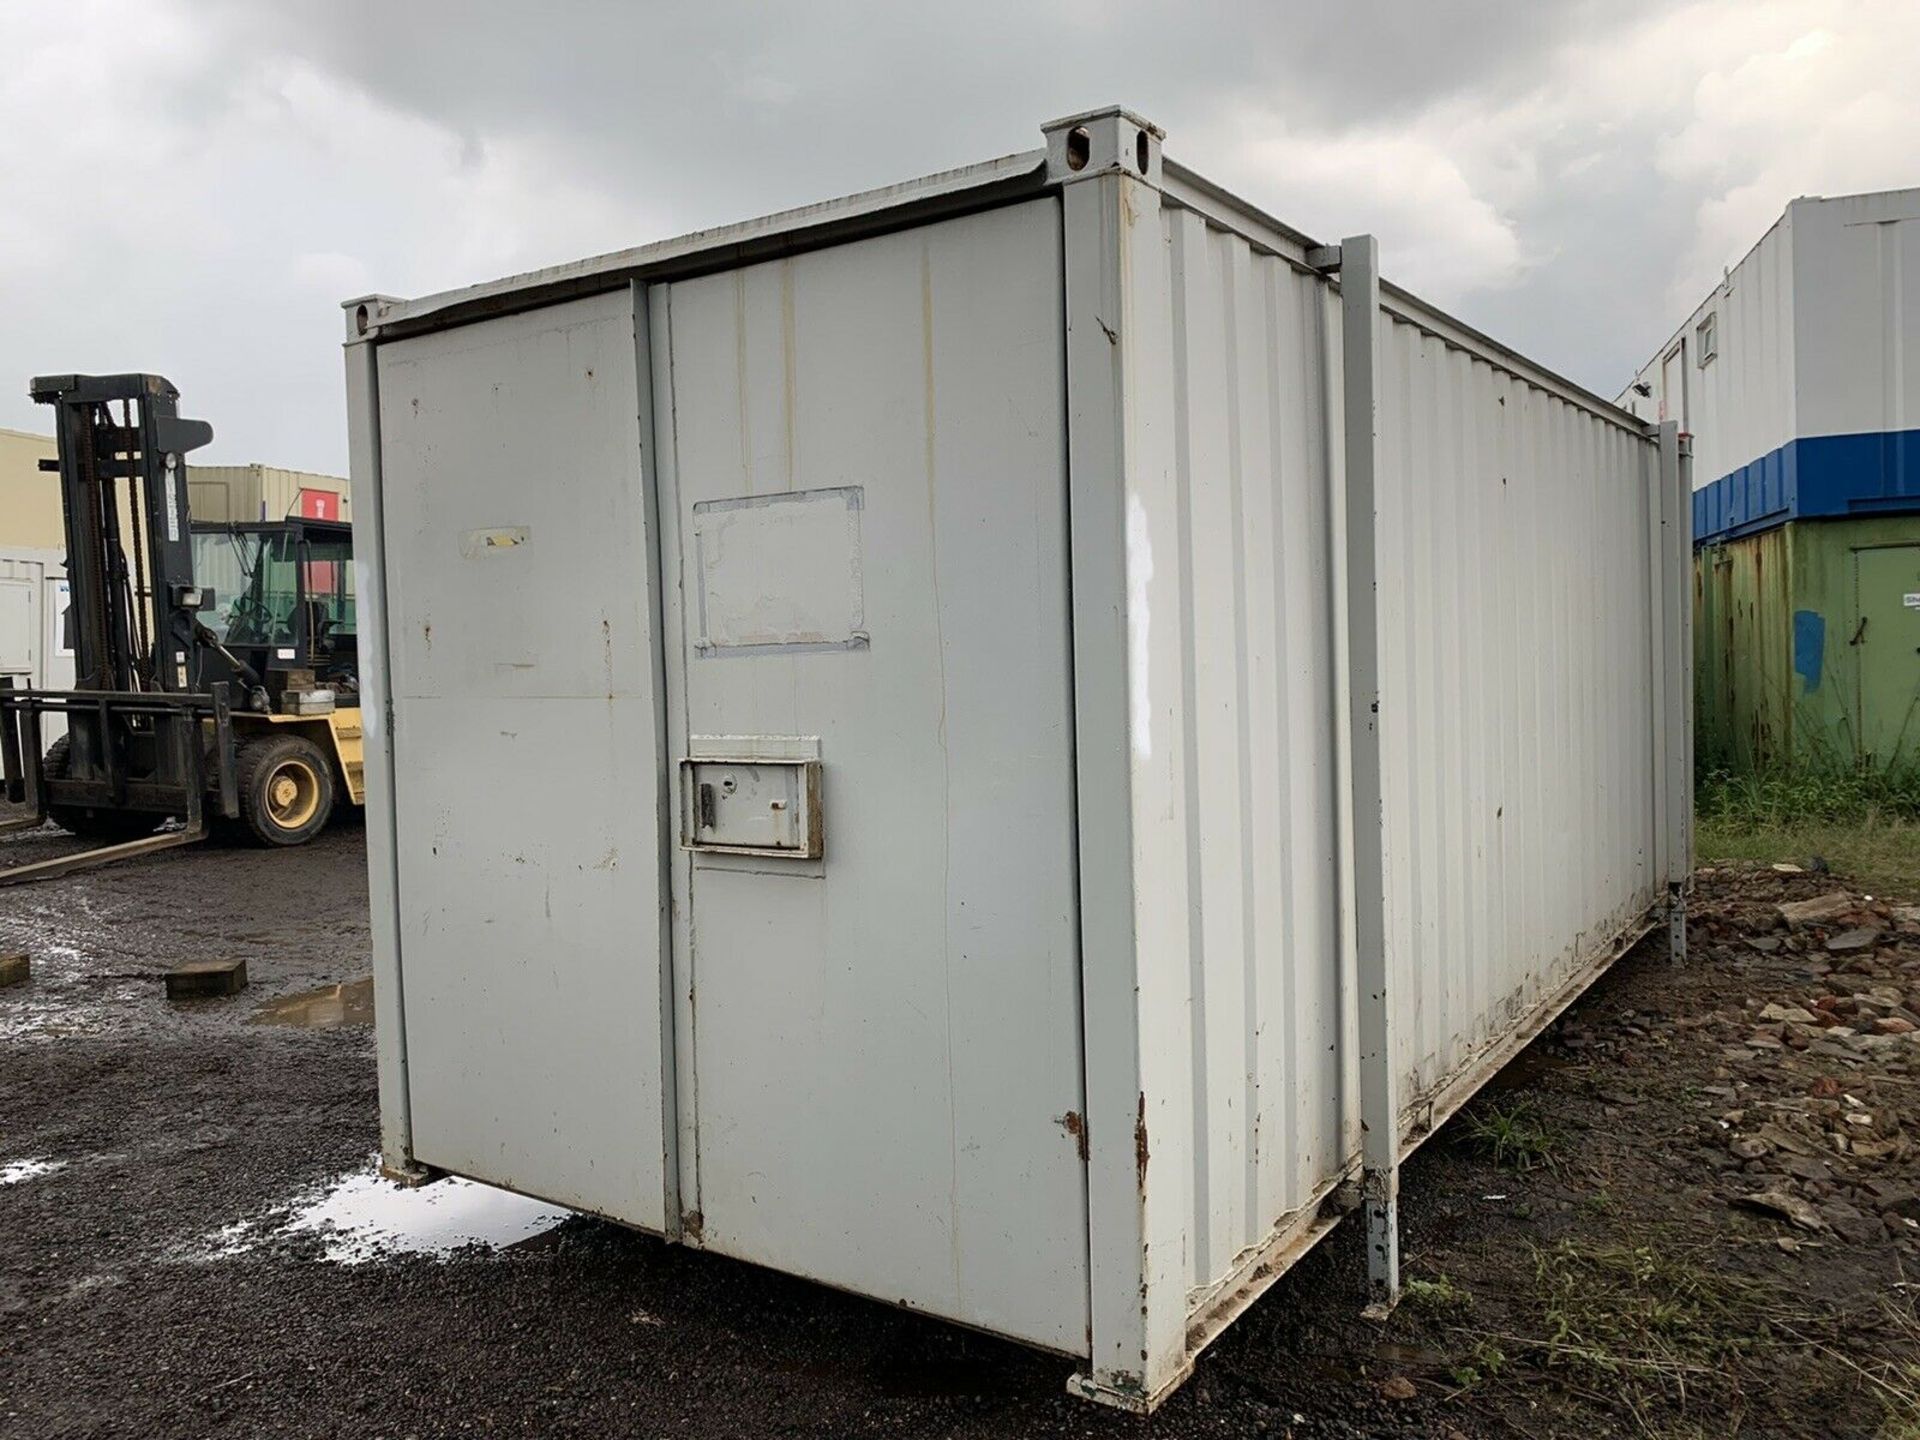 Anti Vandal Steel Portable Storage Container 20ft x 8ft - Image 8 of 9